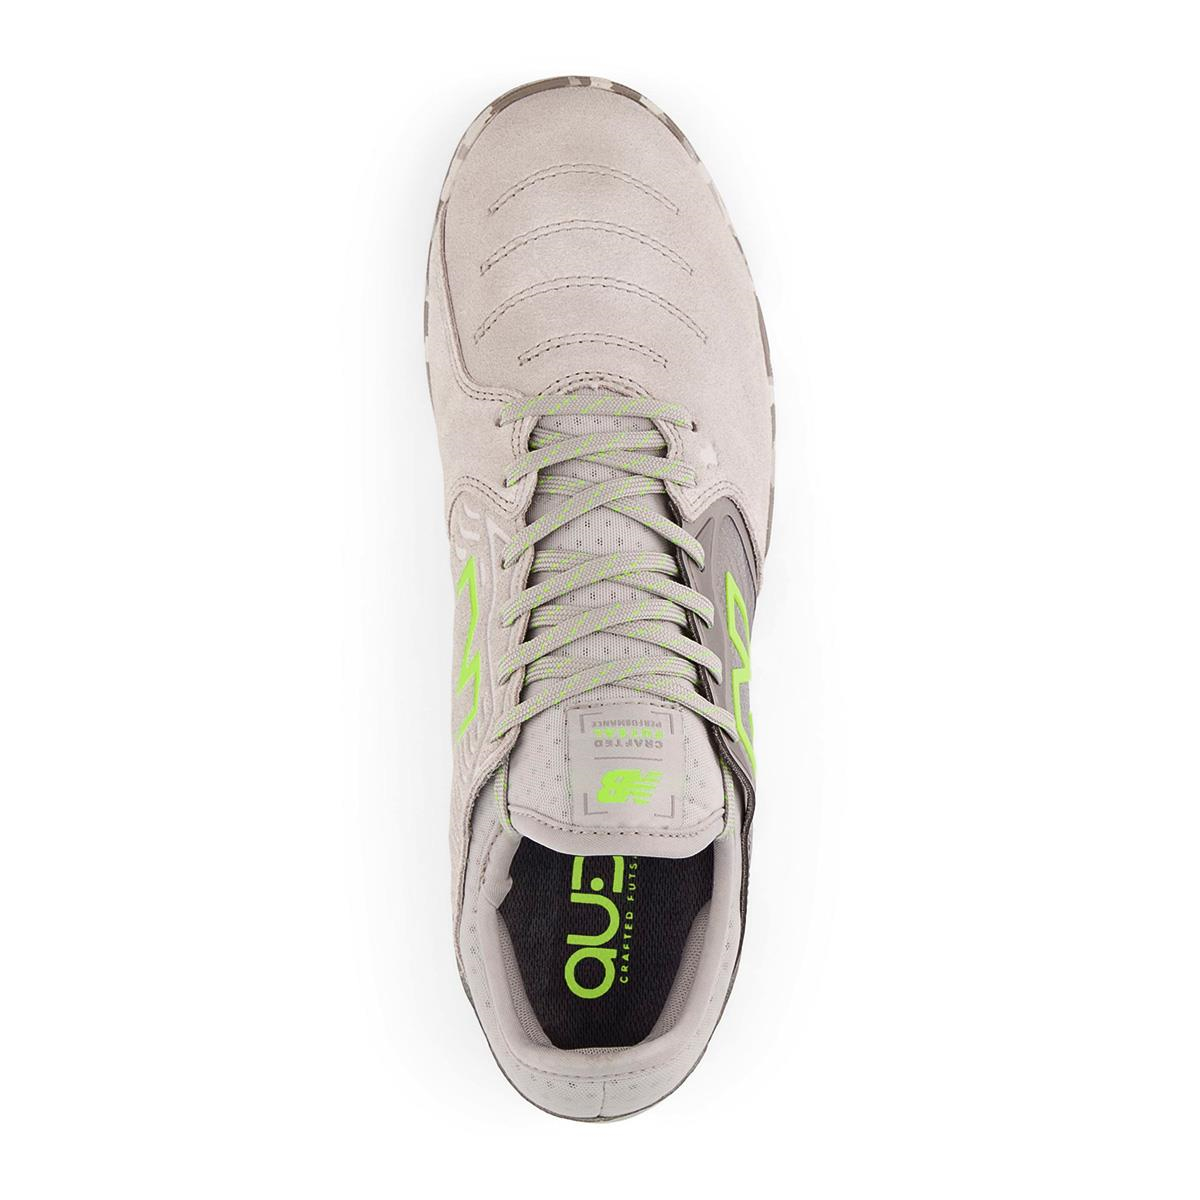 Chaussures Audazo v5+ Pro Suede IN